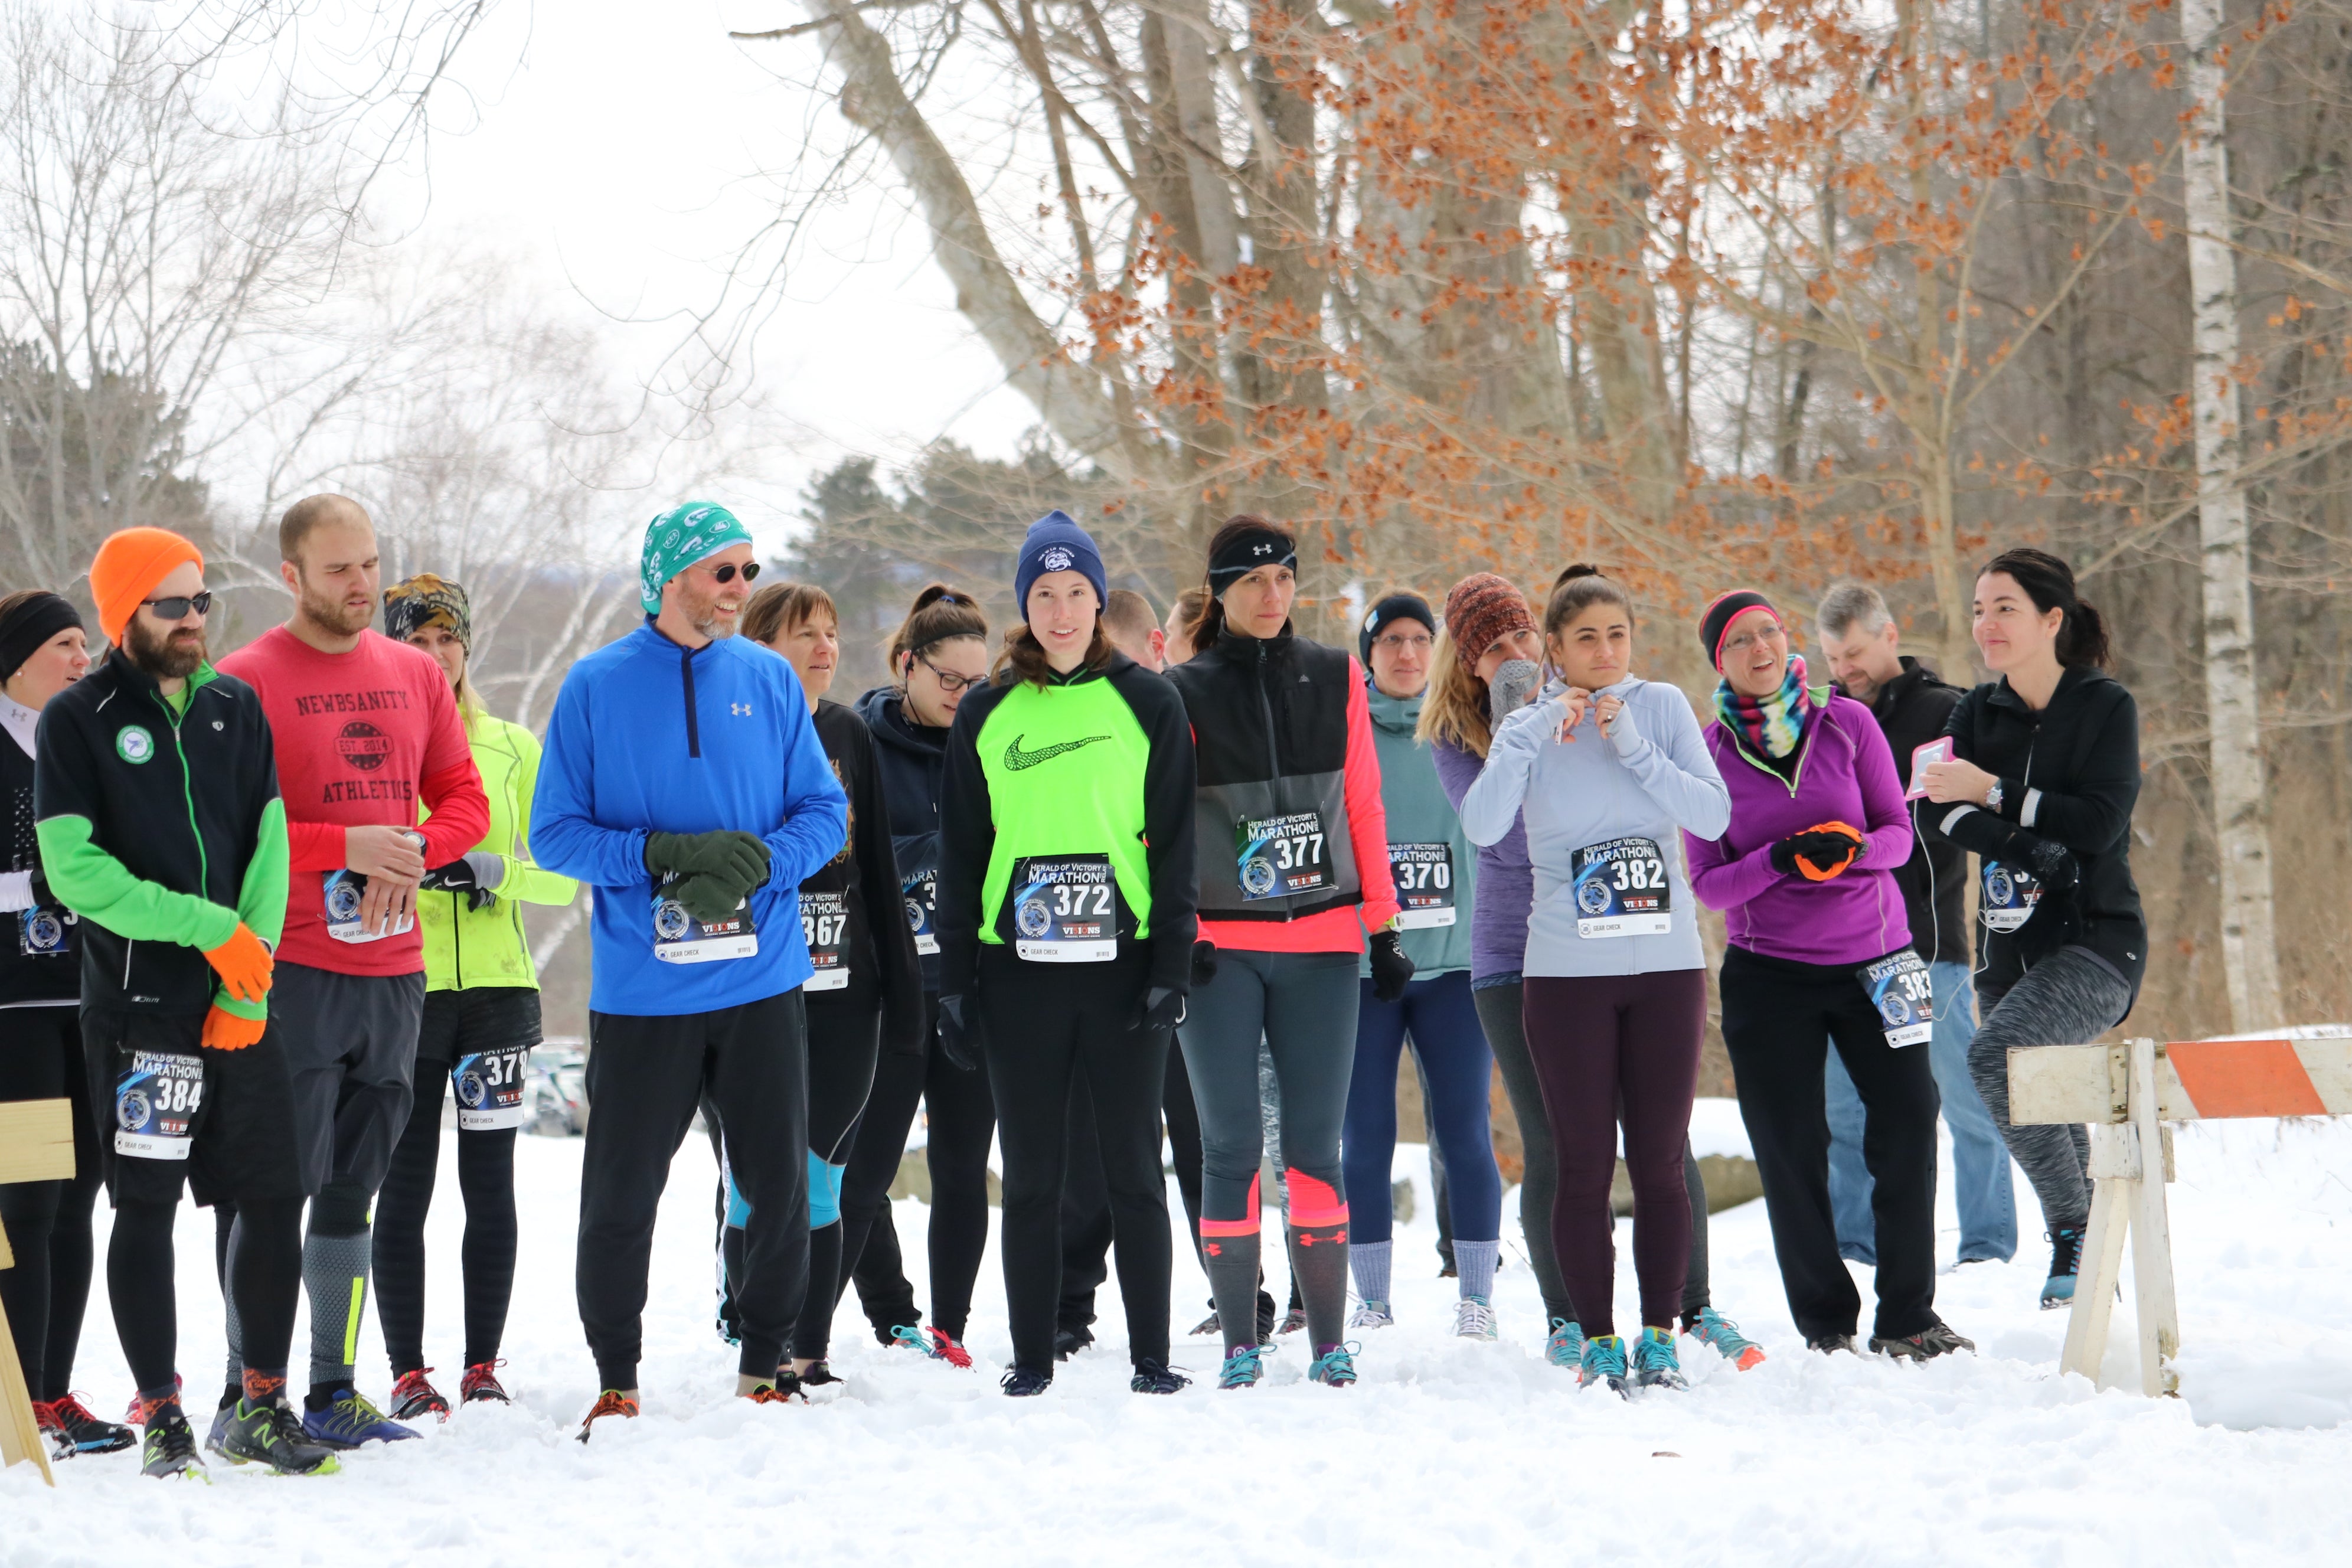 Tips to running in the FRIGID COLD from Altra Footwear.